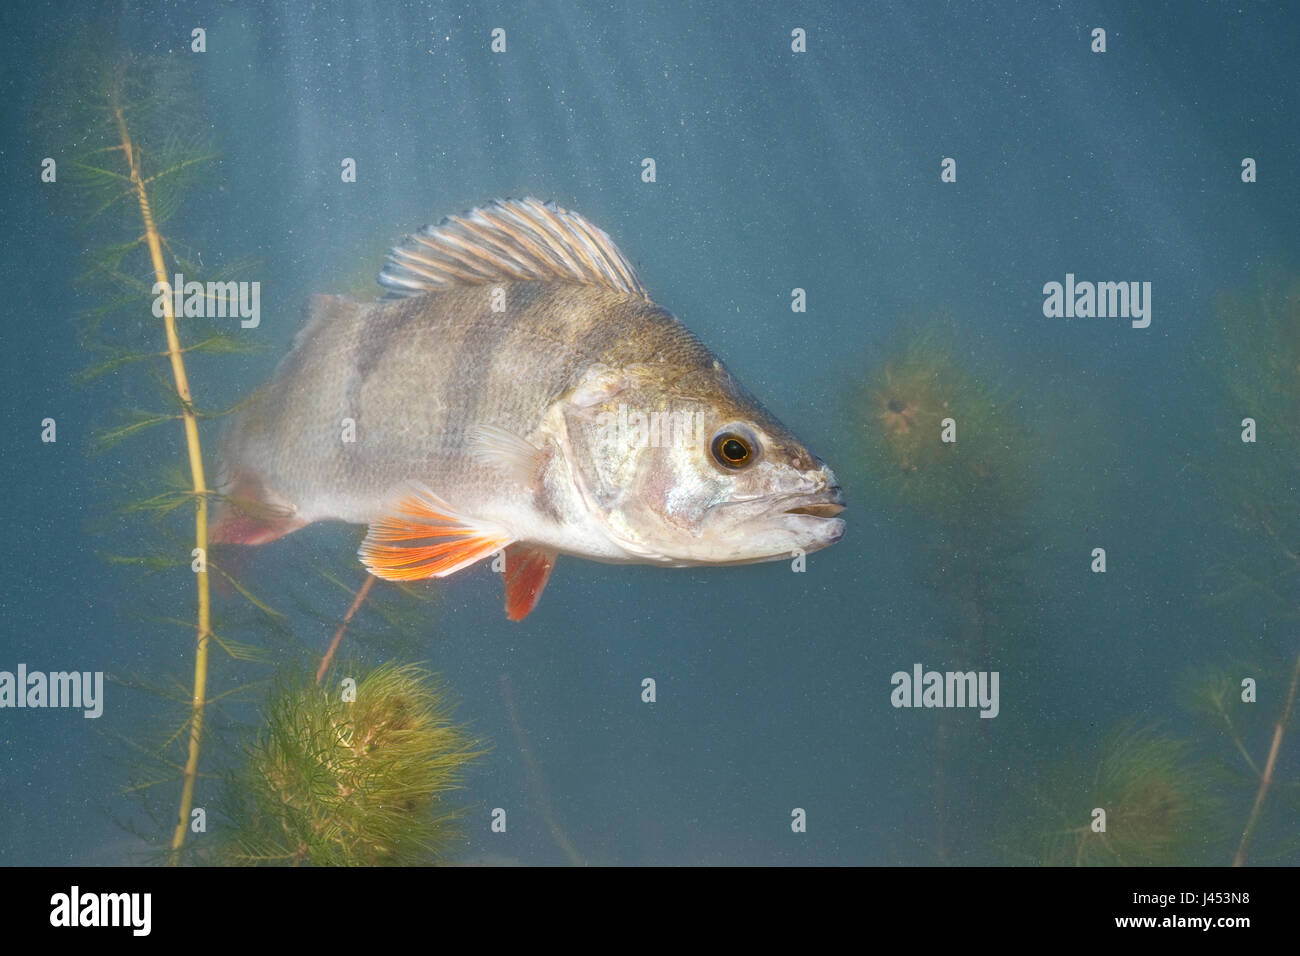 photo of a swimming perch between water plants against a blue background Stock Photo